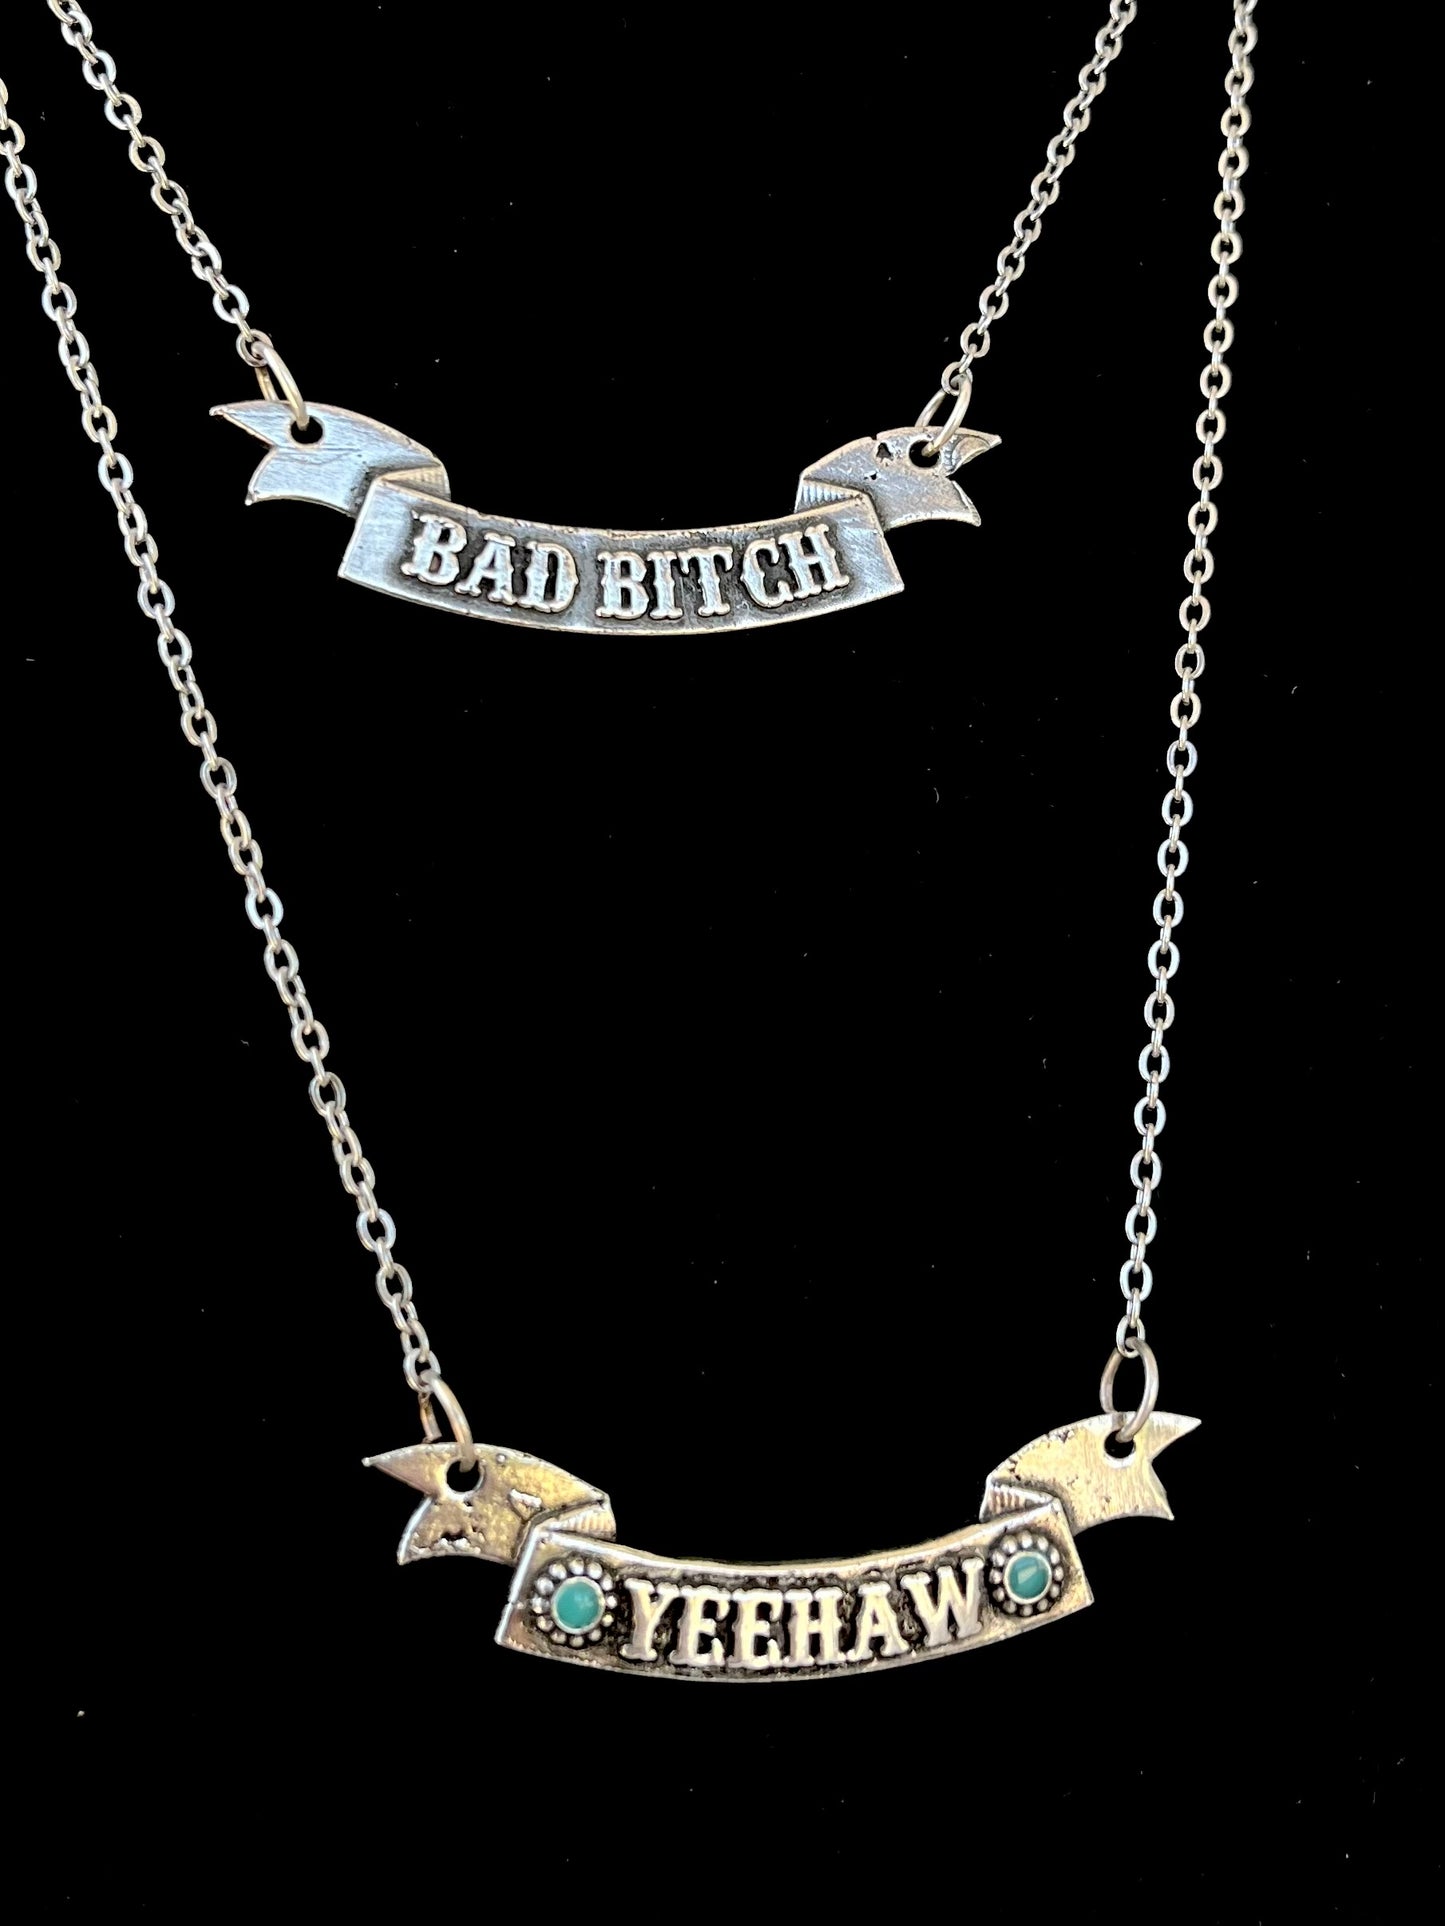 BANNER necklaces